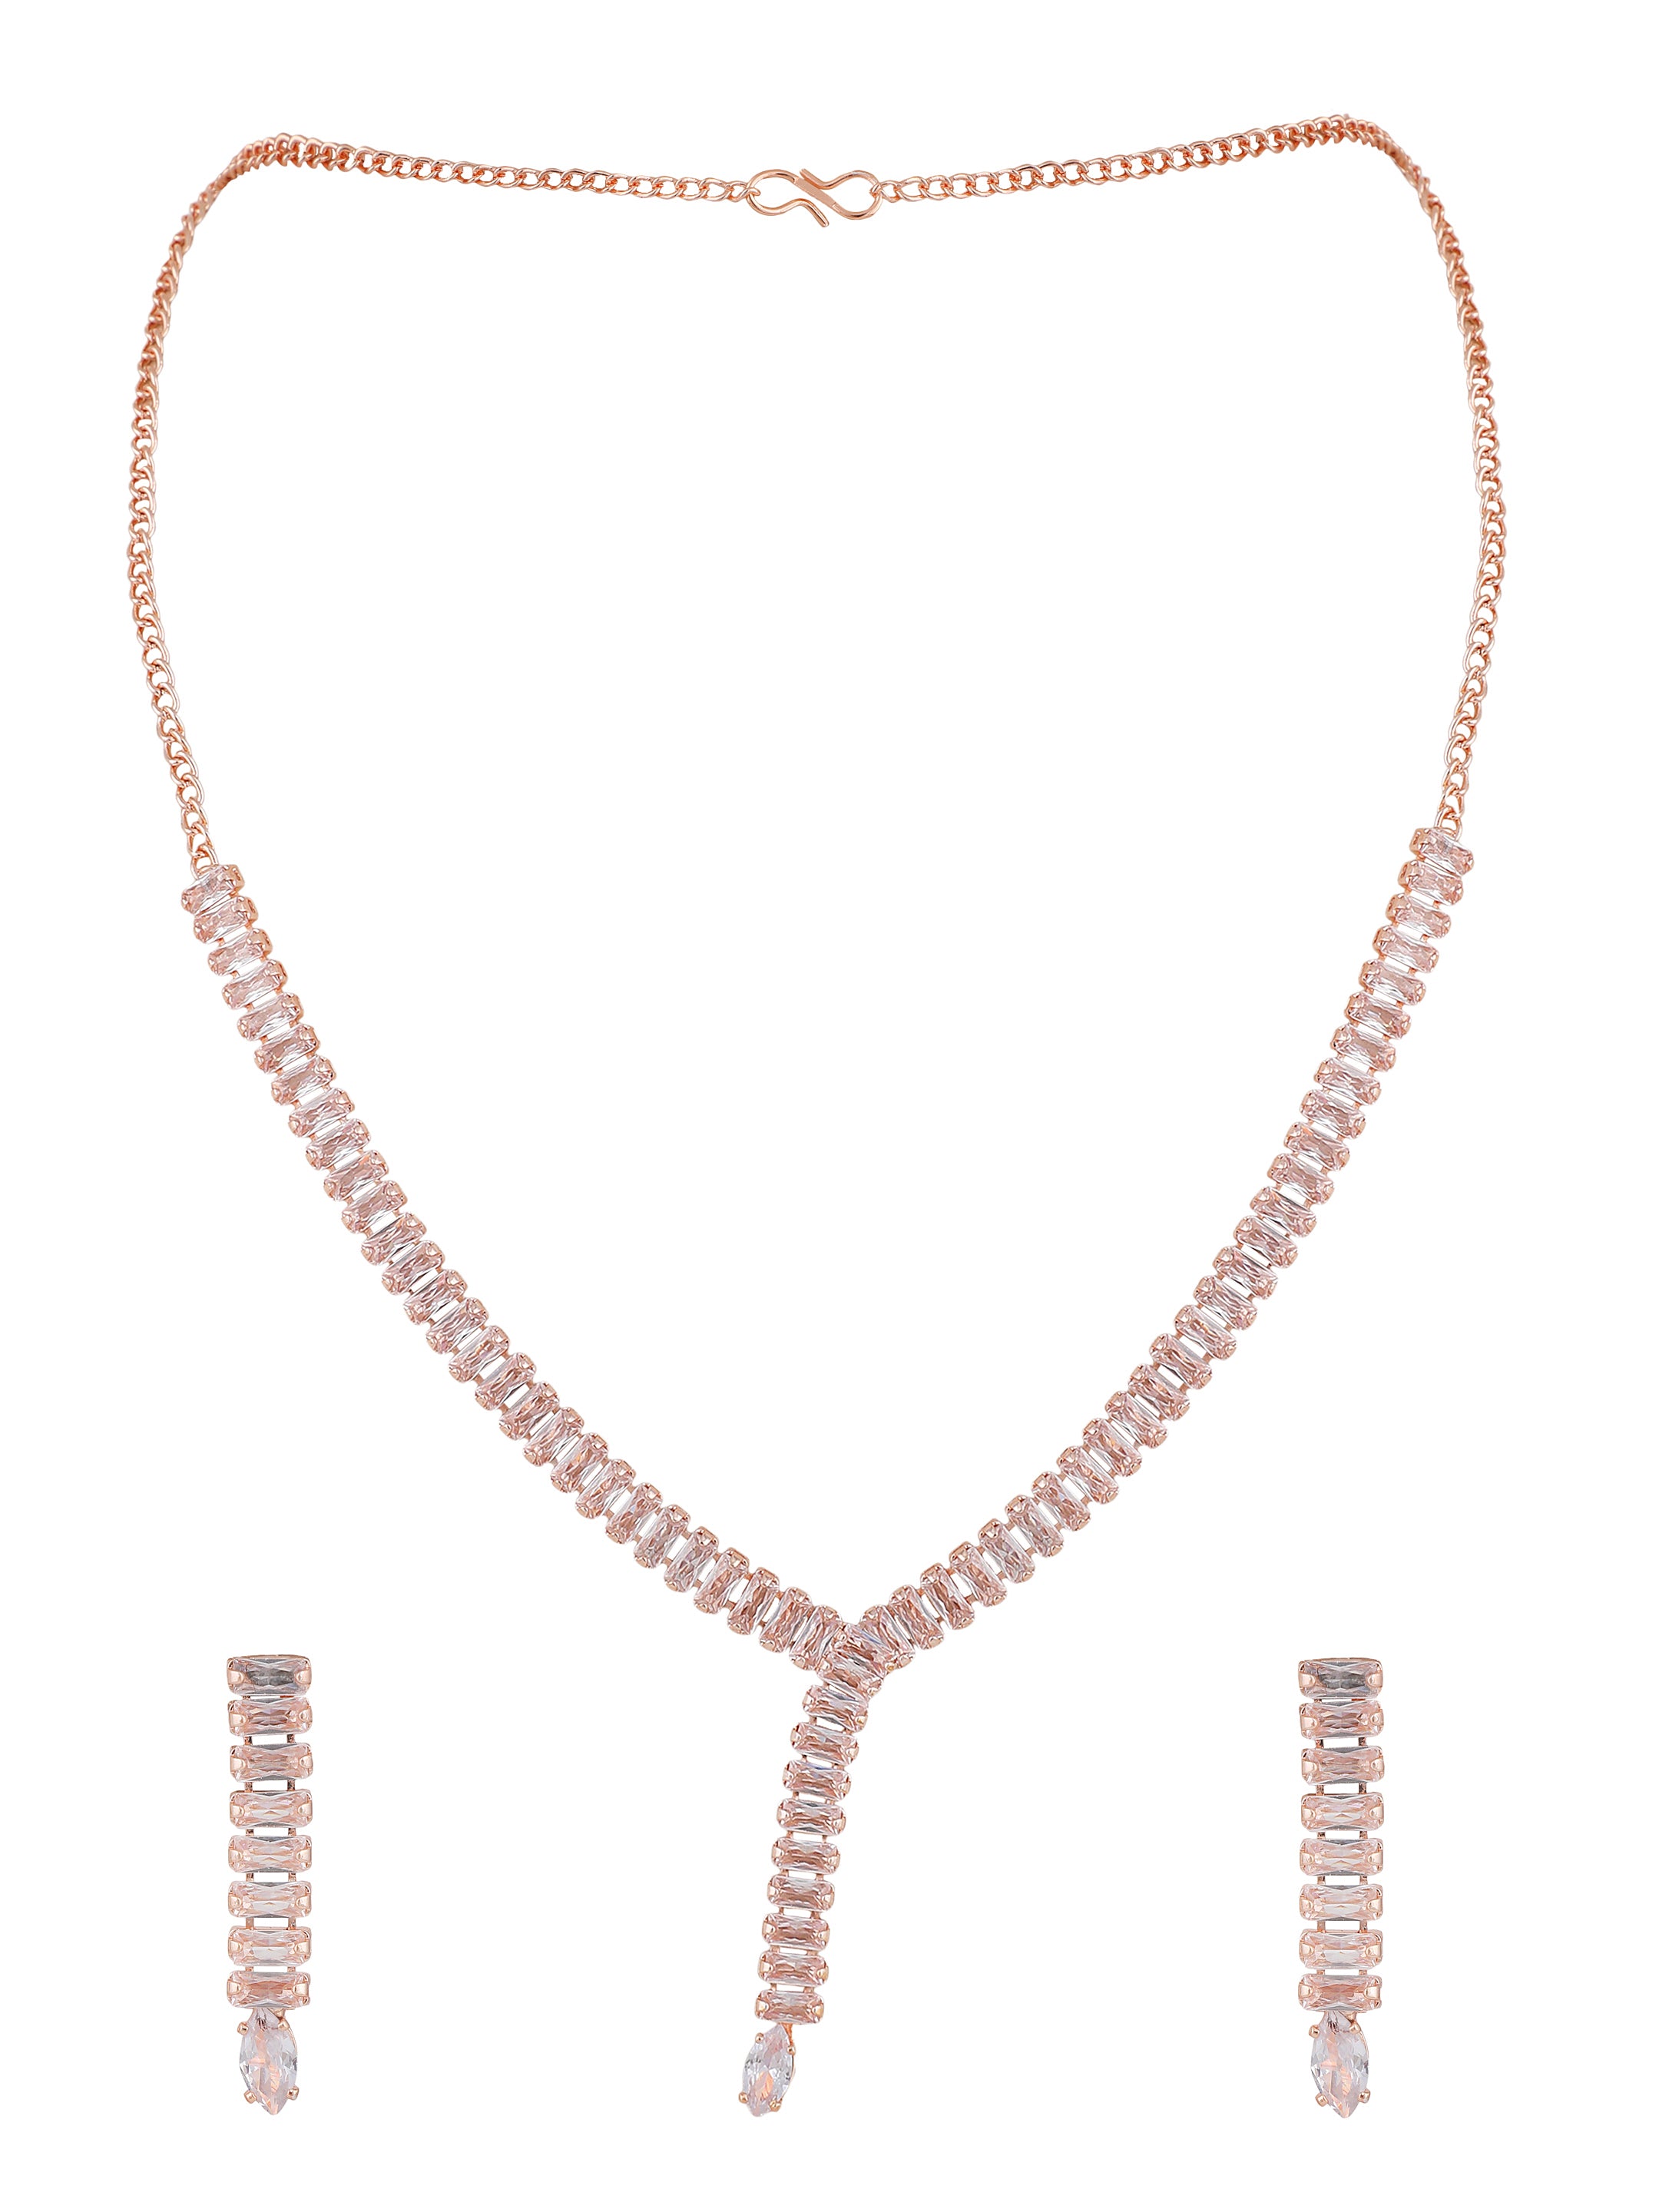 Women's Ad Rose Gold Y Shape Necklace Set - Zaffre Collections